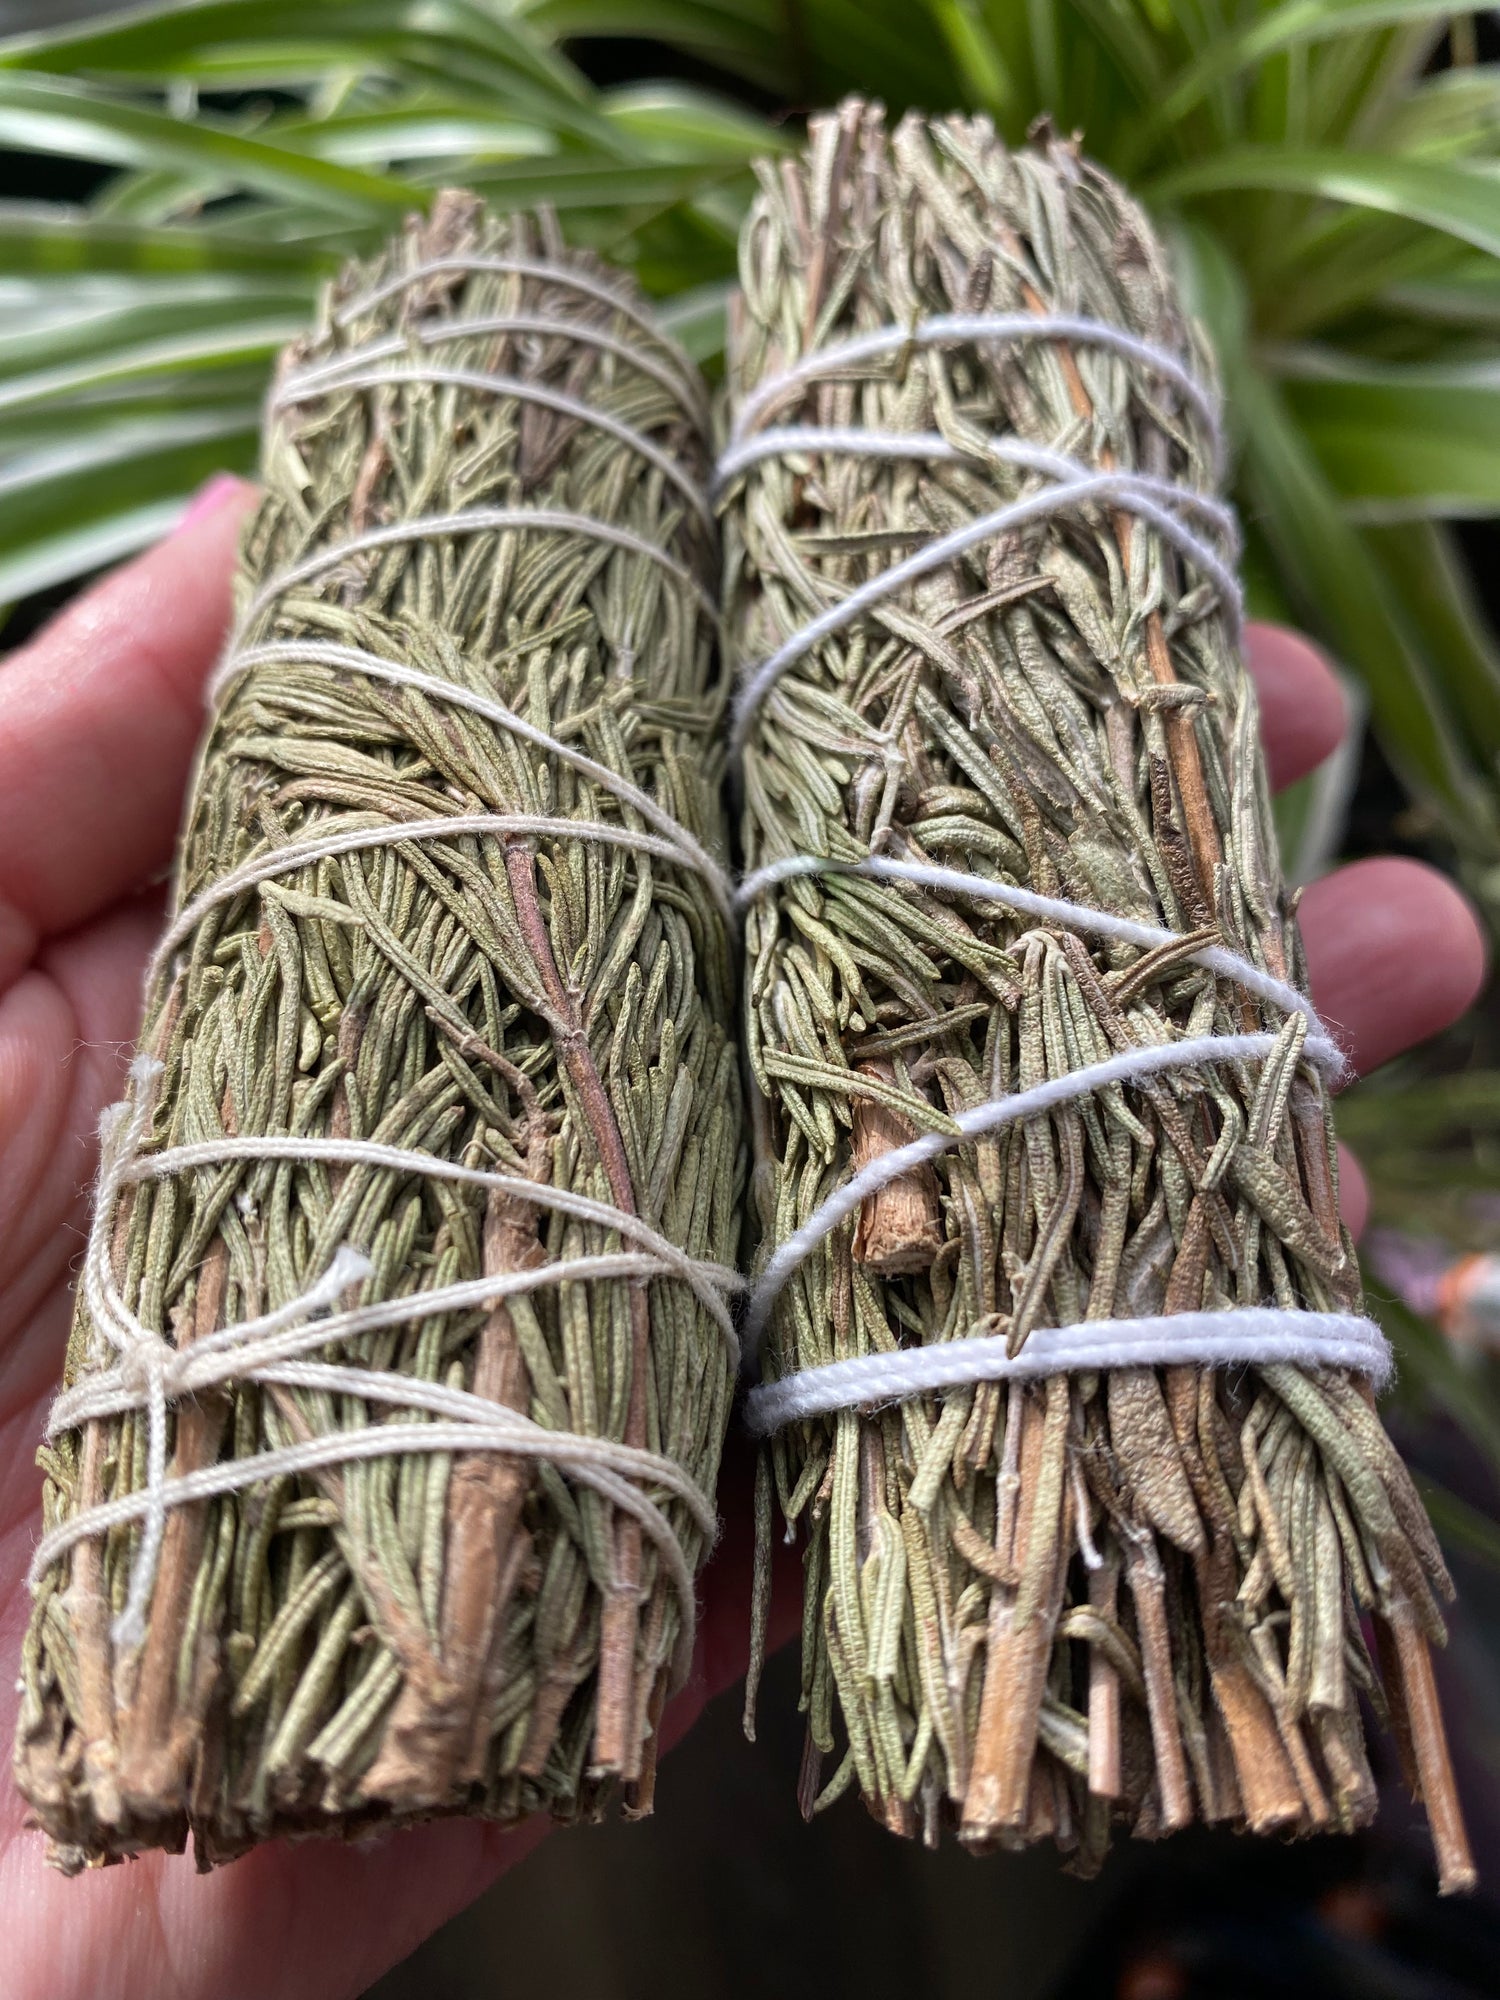 Rosemary Bundle-Premium quality- hand tied -No pesticides- sun dried - Moon Room Shop and Wellness